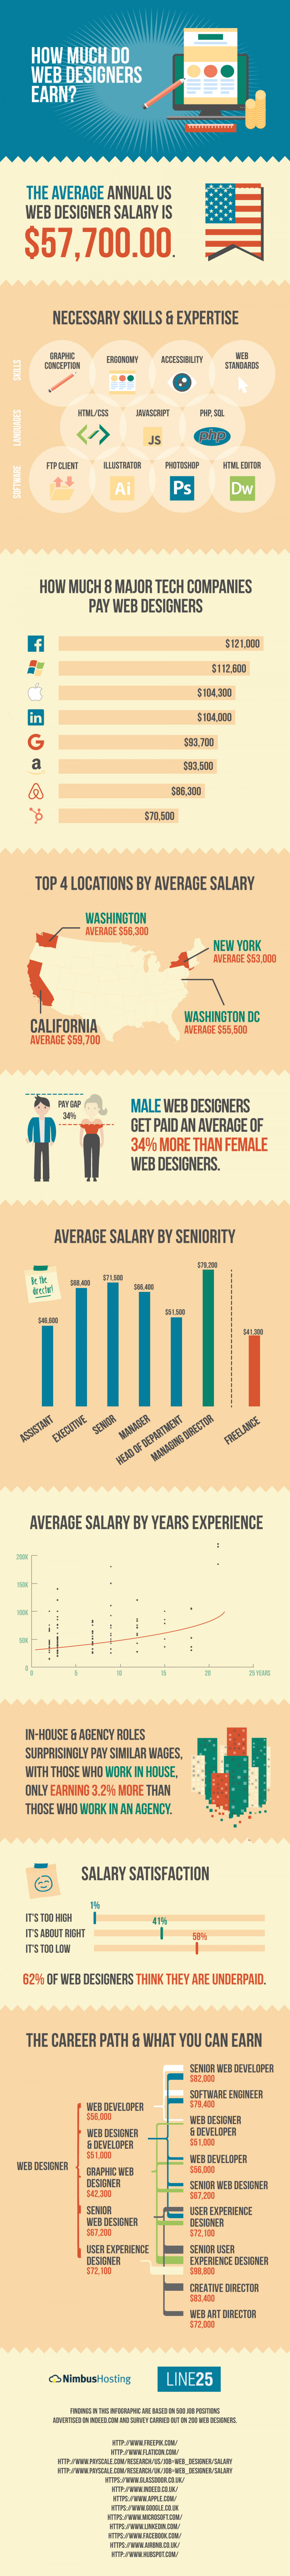 How Much Do Web Designers Make